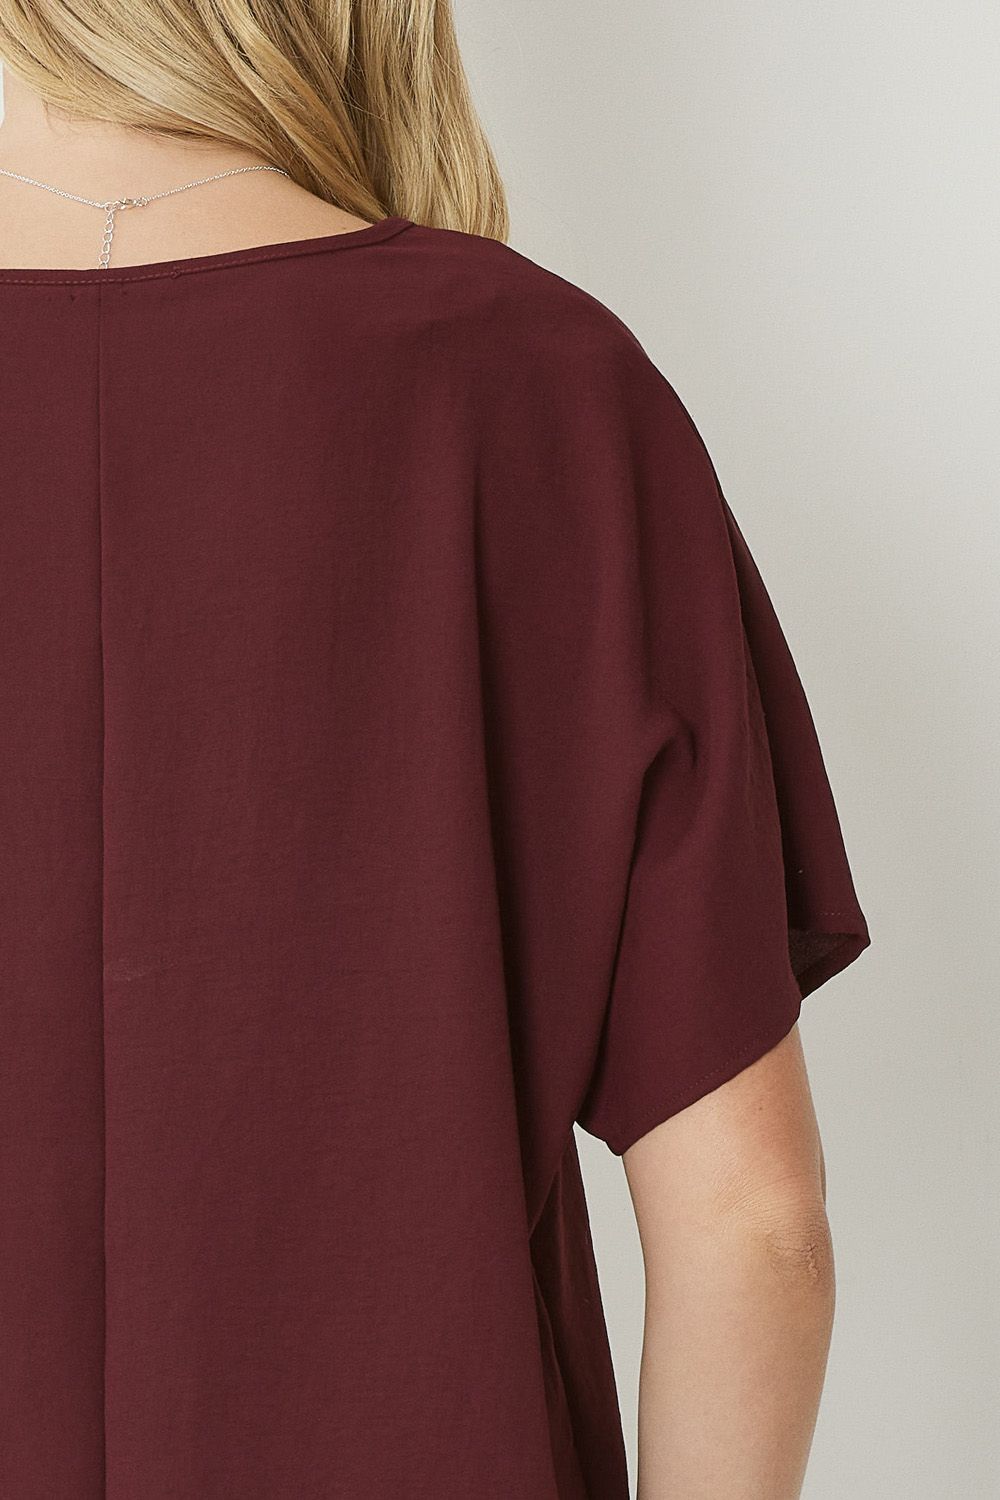 "Everyday Charm" Top (Burgundy) - Happily Ever Aften